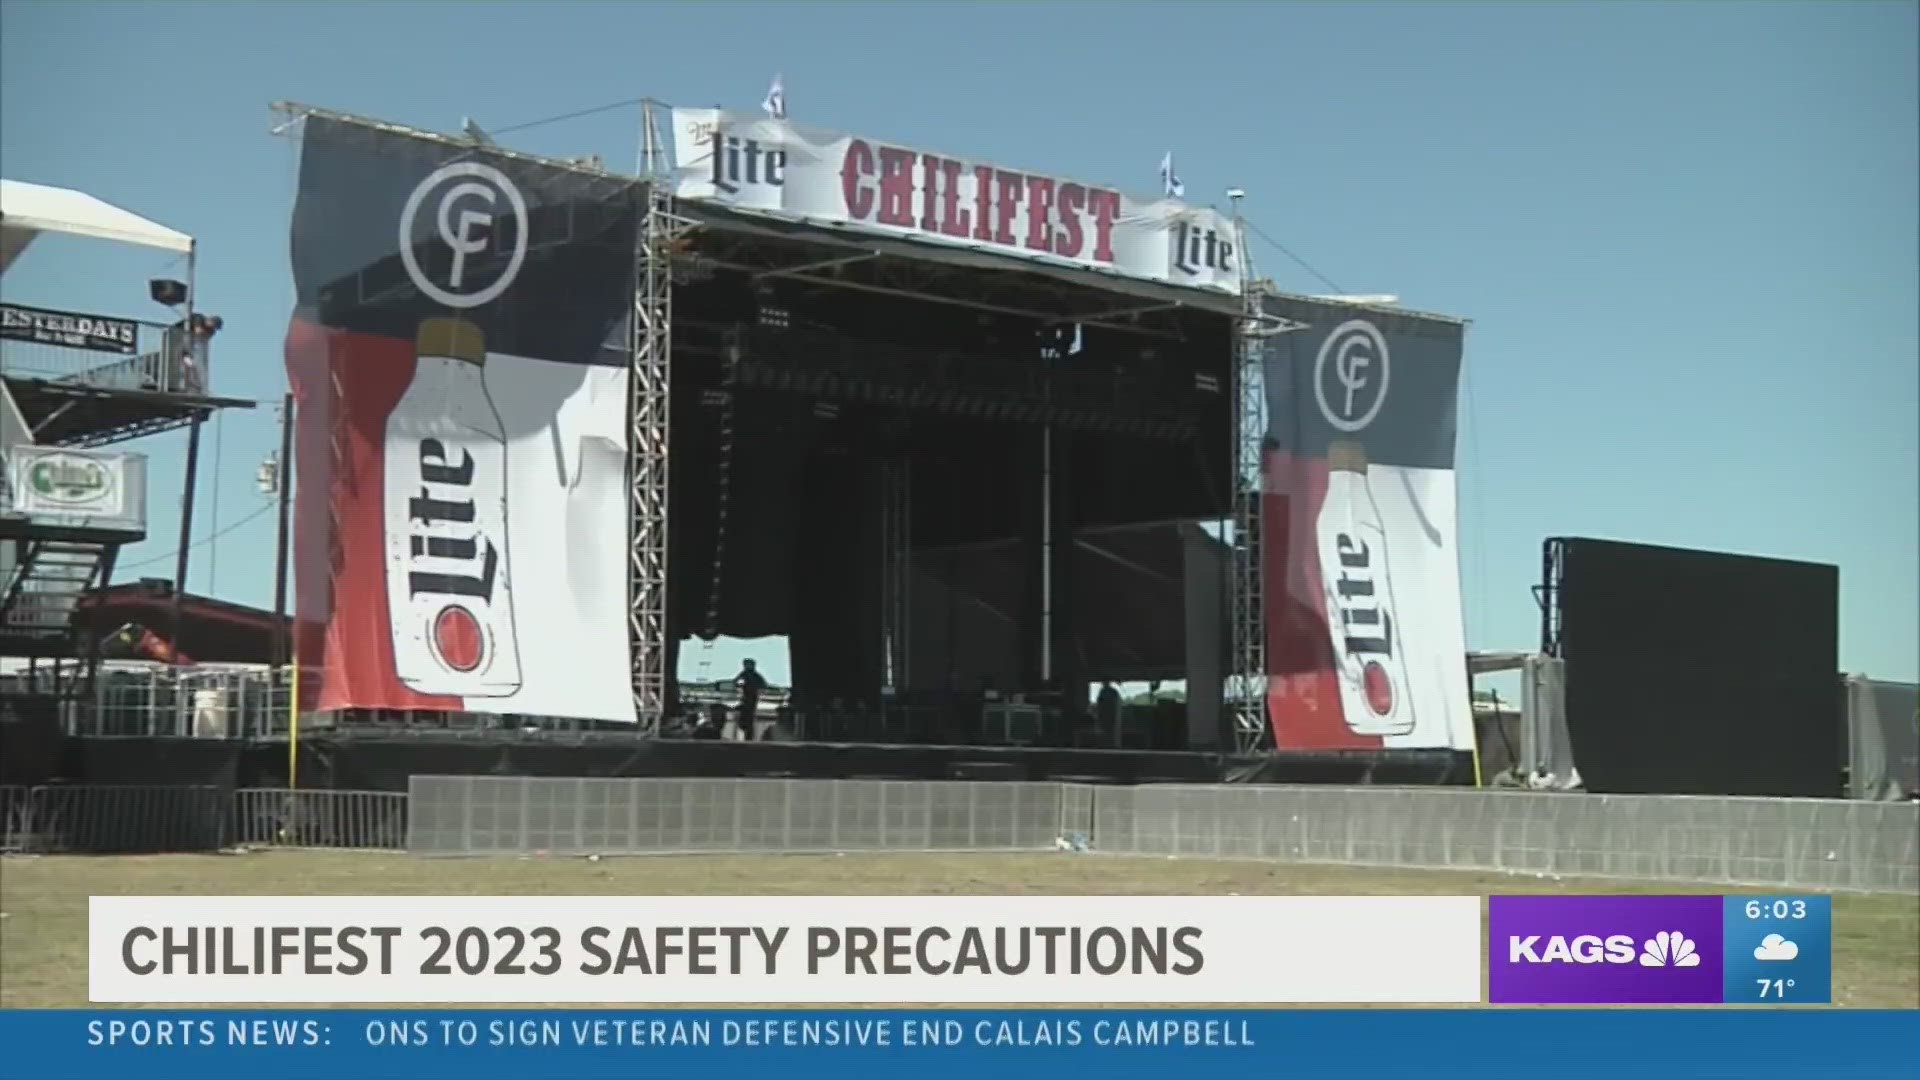 Chilifest is kicking off this weekend, and local law enforcement agencies are banding together to make sure the roads are safe from drunk drivers.